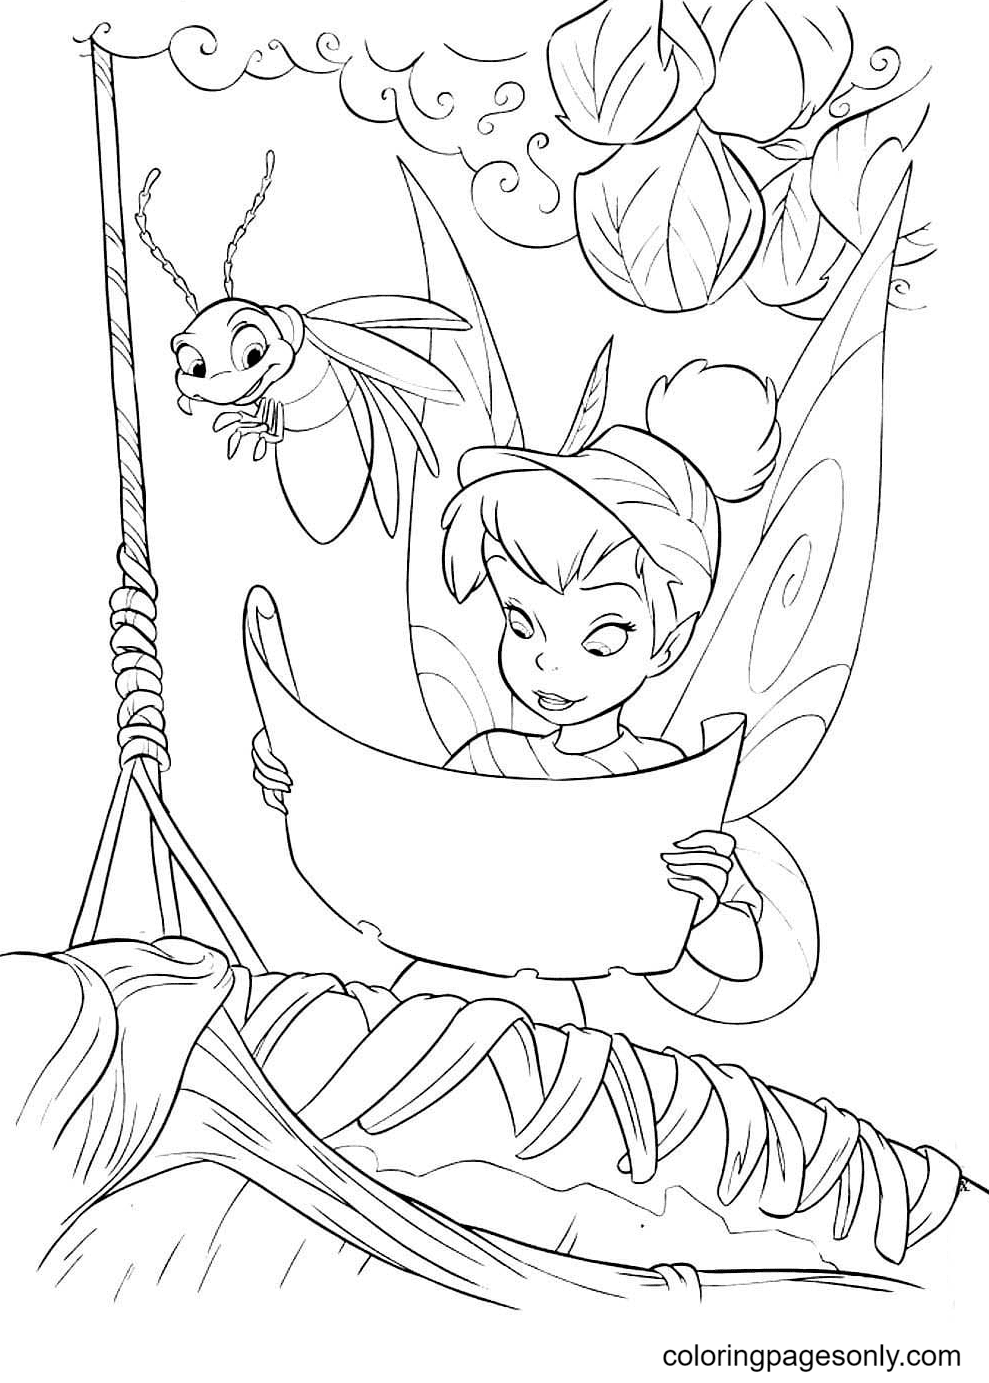 Firefly with Tinkerbell Coloring Pages - Tinkerbell Coloring Pages - Coloring  Pages For Kids And Adults